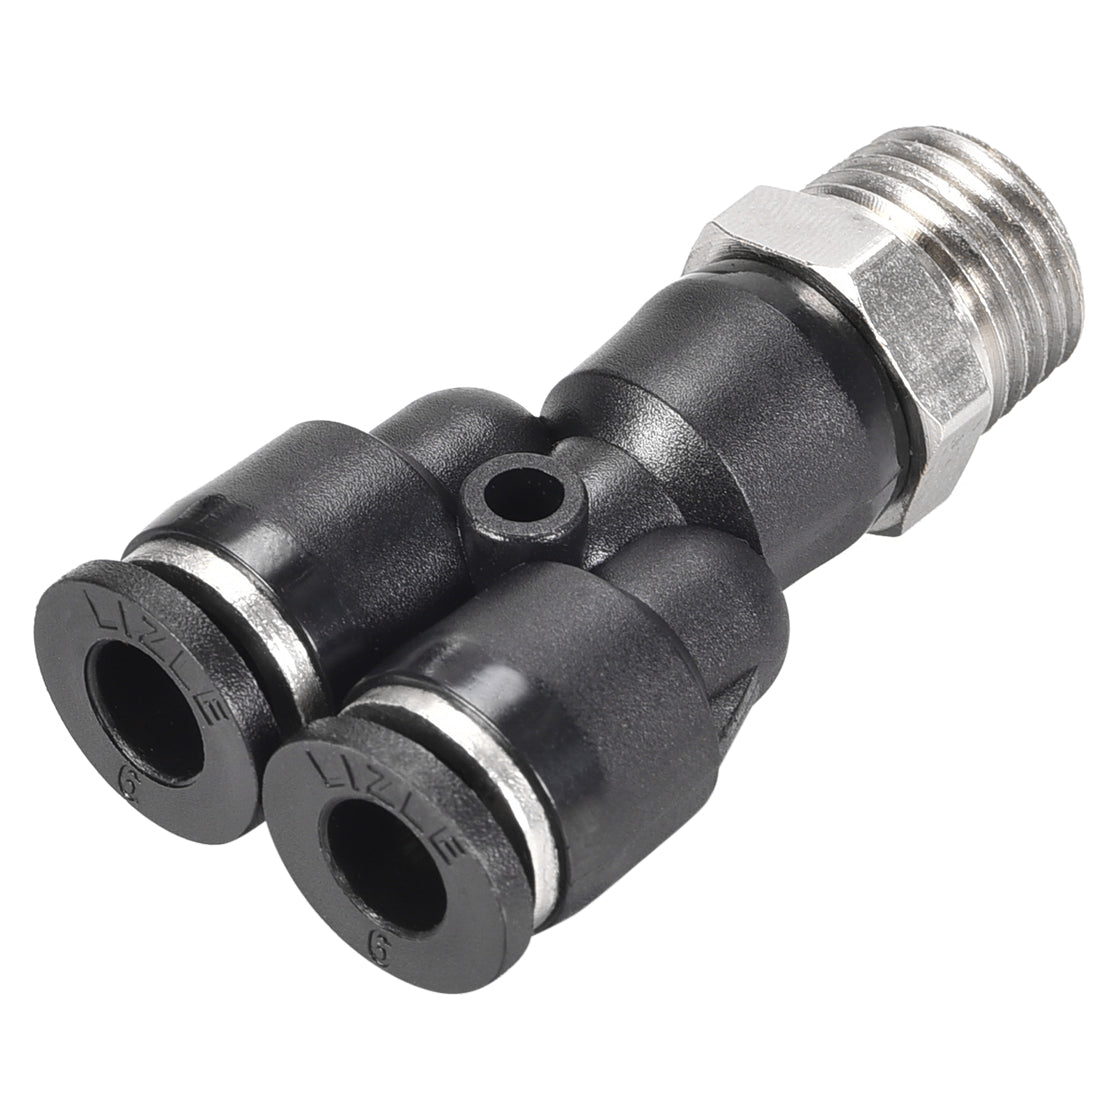 uxcell Uxcell Push To Connect Air Fittings Y Type Tube Connect 6mm OD x 1/4PT Male Thread Tube Fittings Push Lock Black 2Pcs